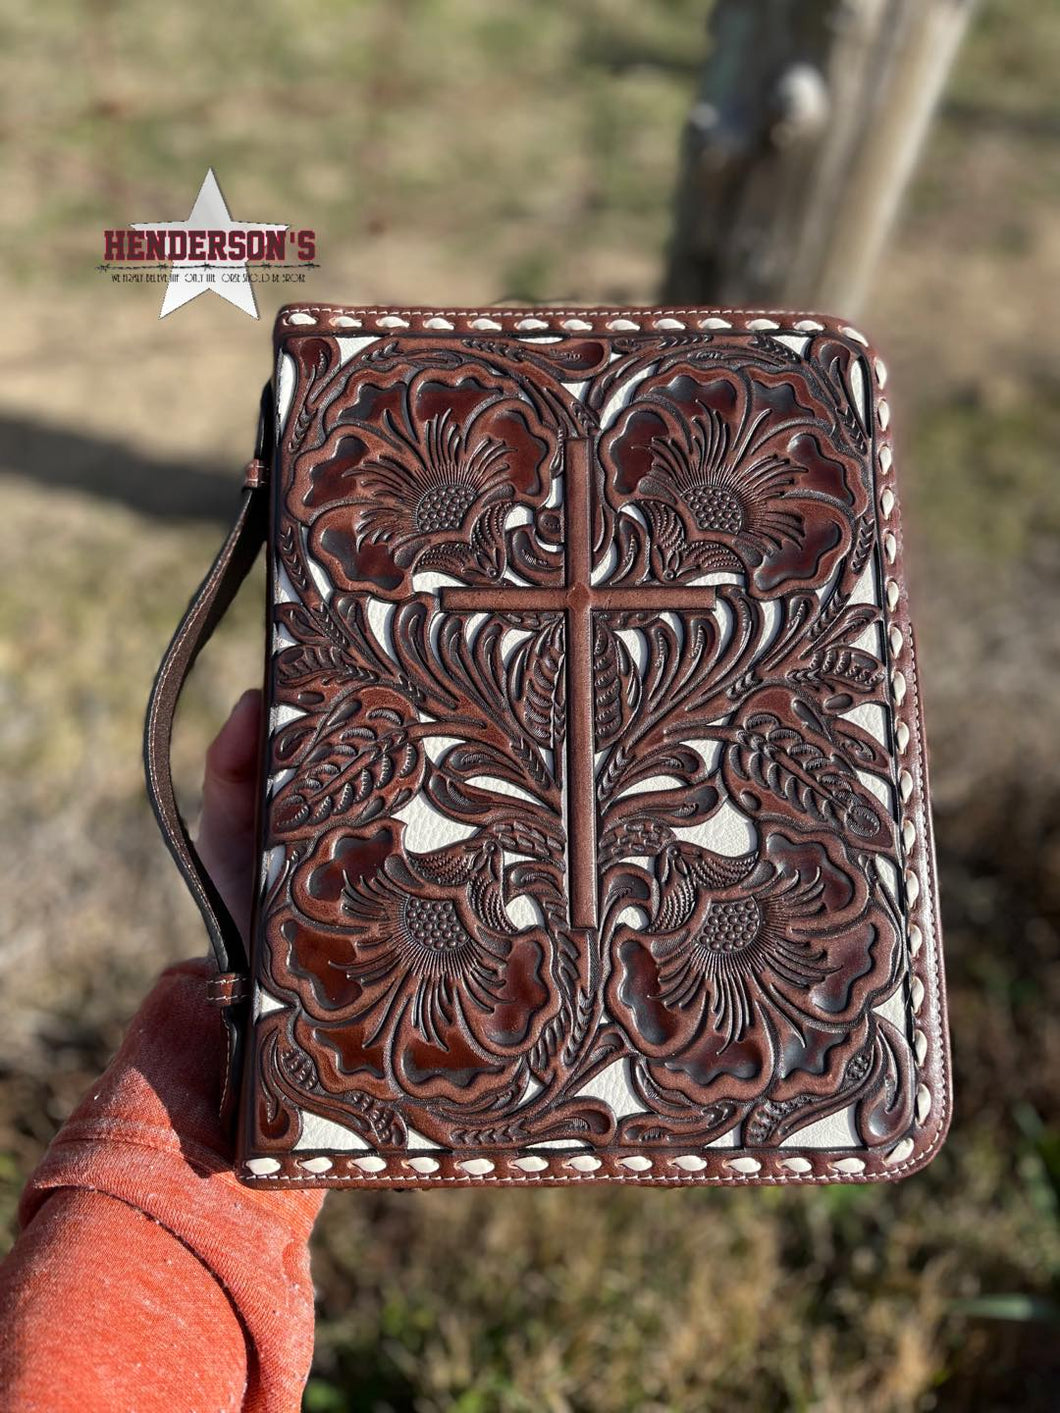 Buckstitched Floral Tooled Bible Cover - Henderson's Western Store